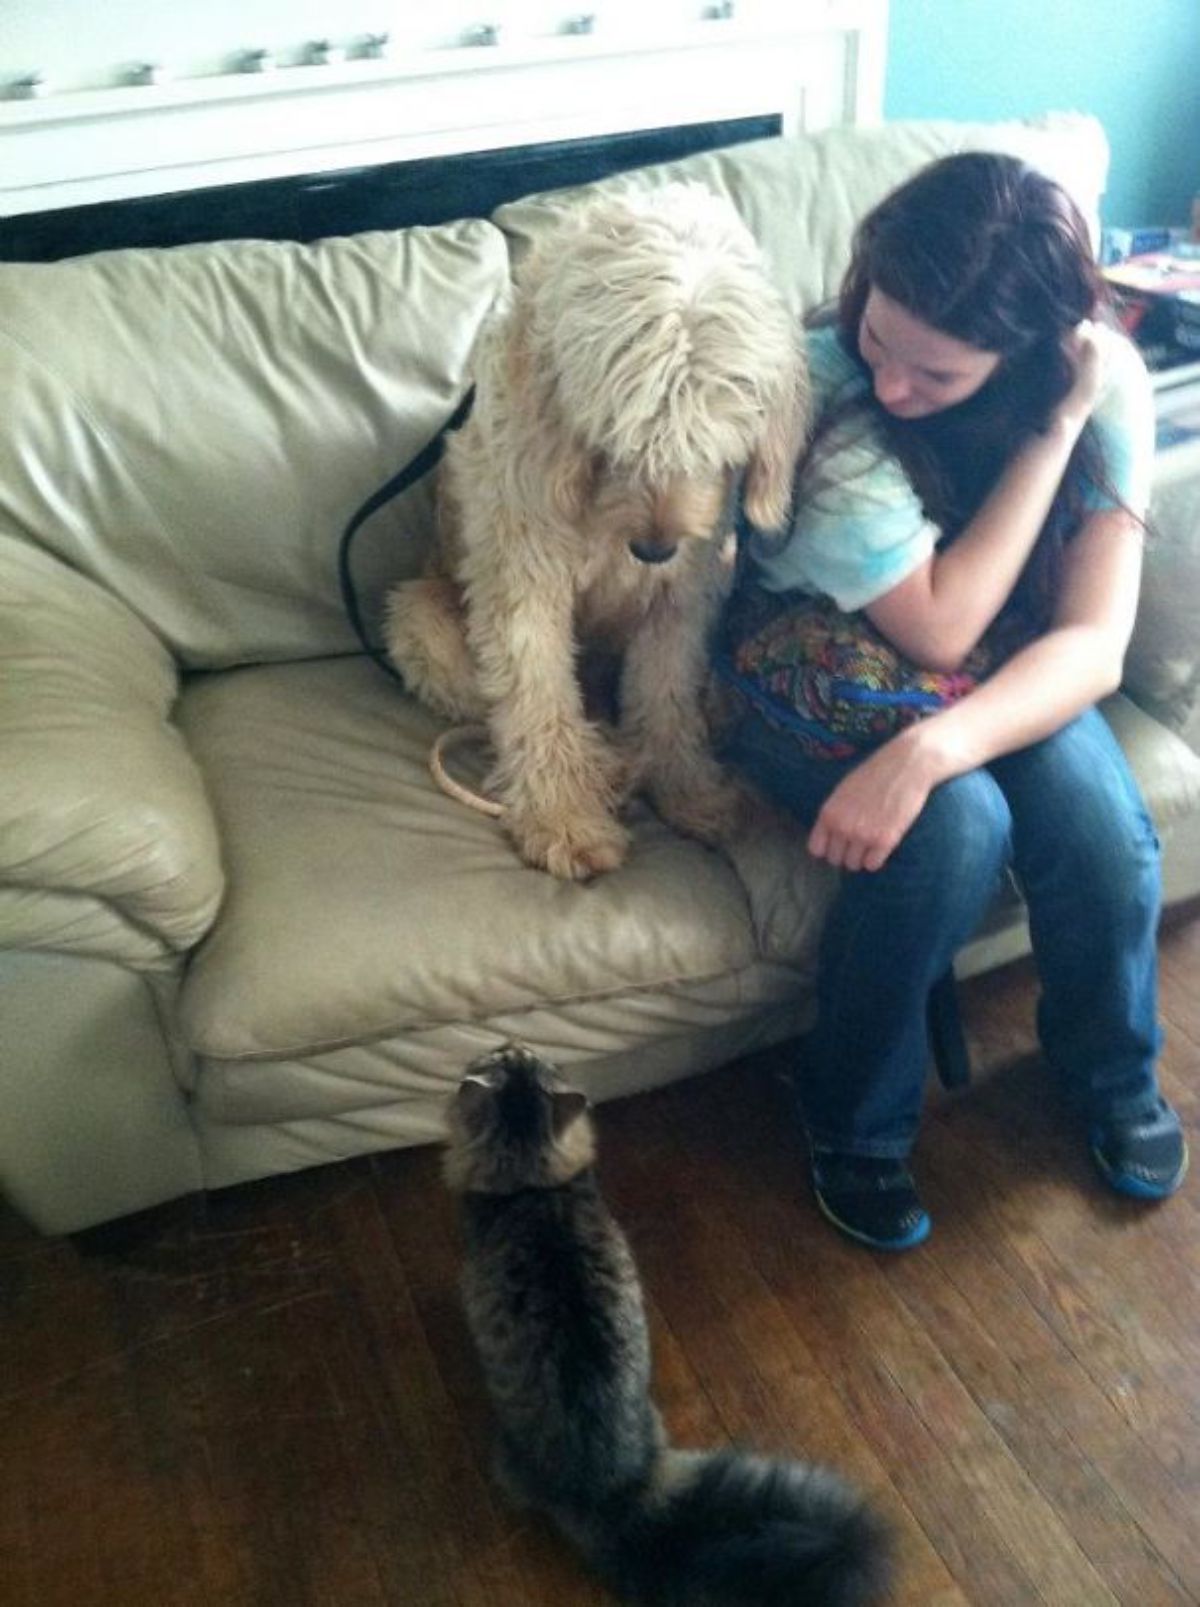 large brown fluffy dog sitting ona beige sofa next to a woman and the dog is afraid of a brown tabby cat sitting on the floor